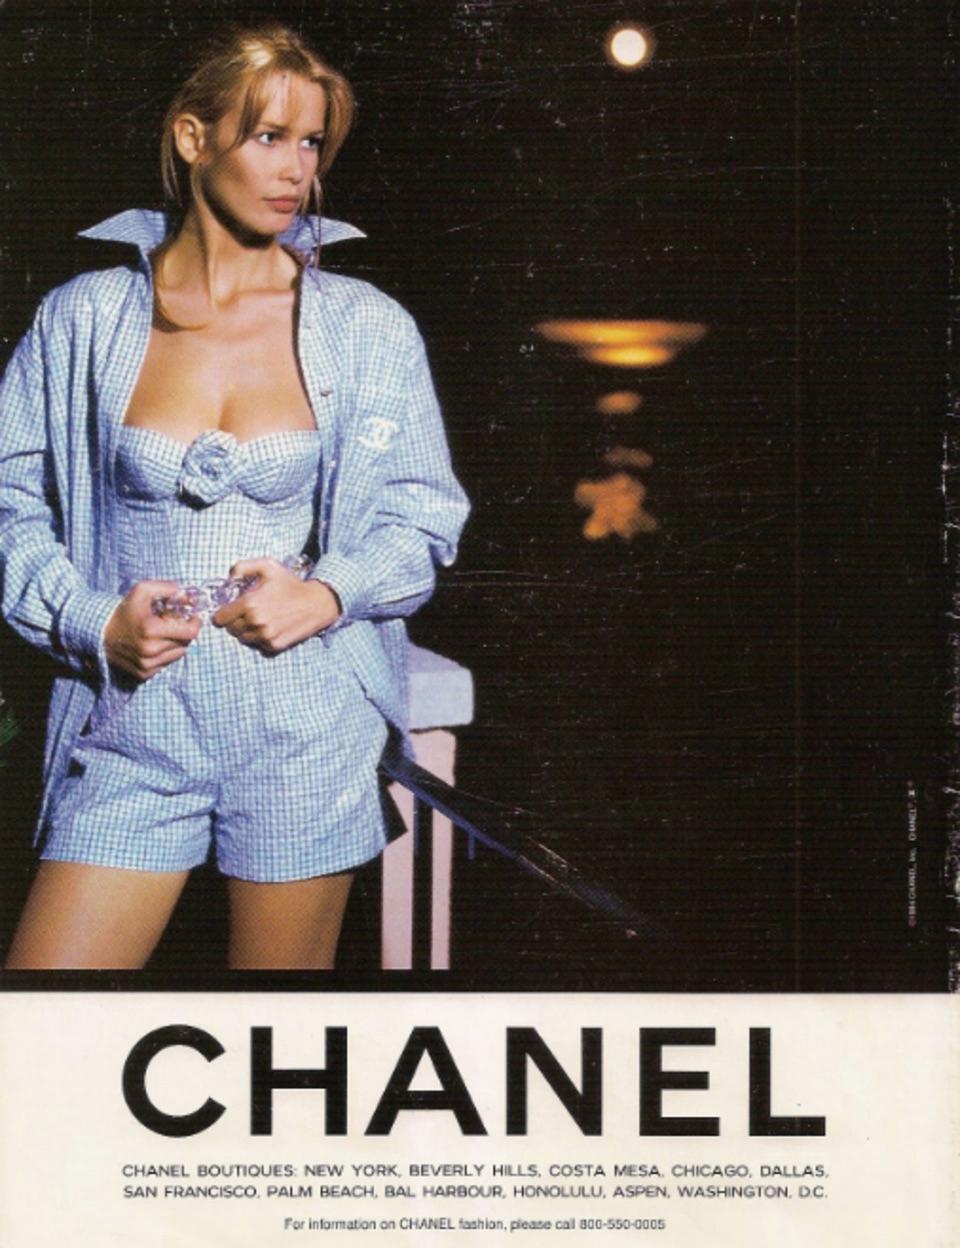 The rare blue and white sequin embellished gingham print 3pcs set from the Chanel Cruise 1995 collection is an exceptionally stunning piece. As seen on Claudia Schiffer, the set consists of cotton bustier top, shorts and a camellia brooch. In very